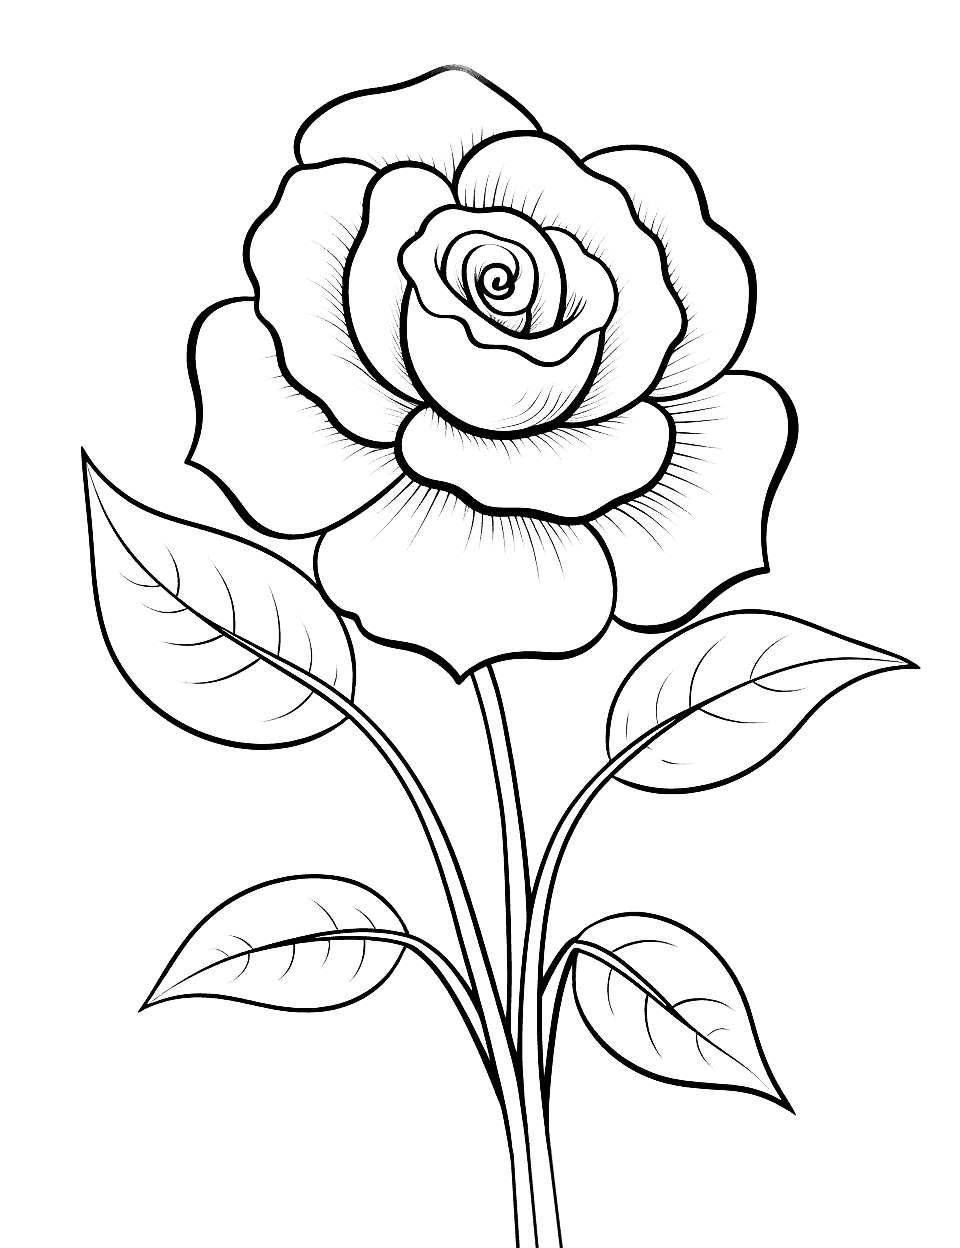 Easy lily flower drawing pencil art Royalty Free Vector-saigonsouth.com.vn